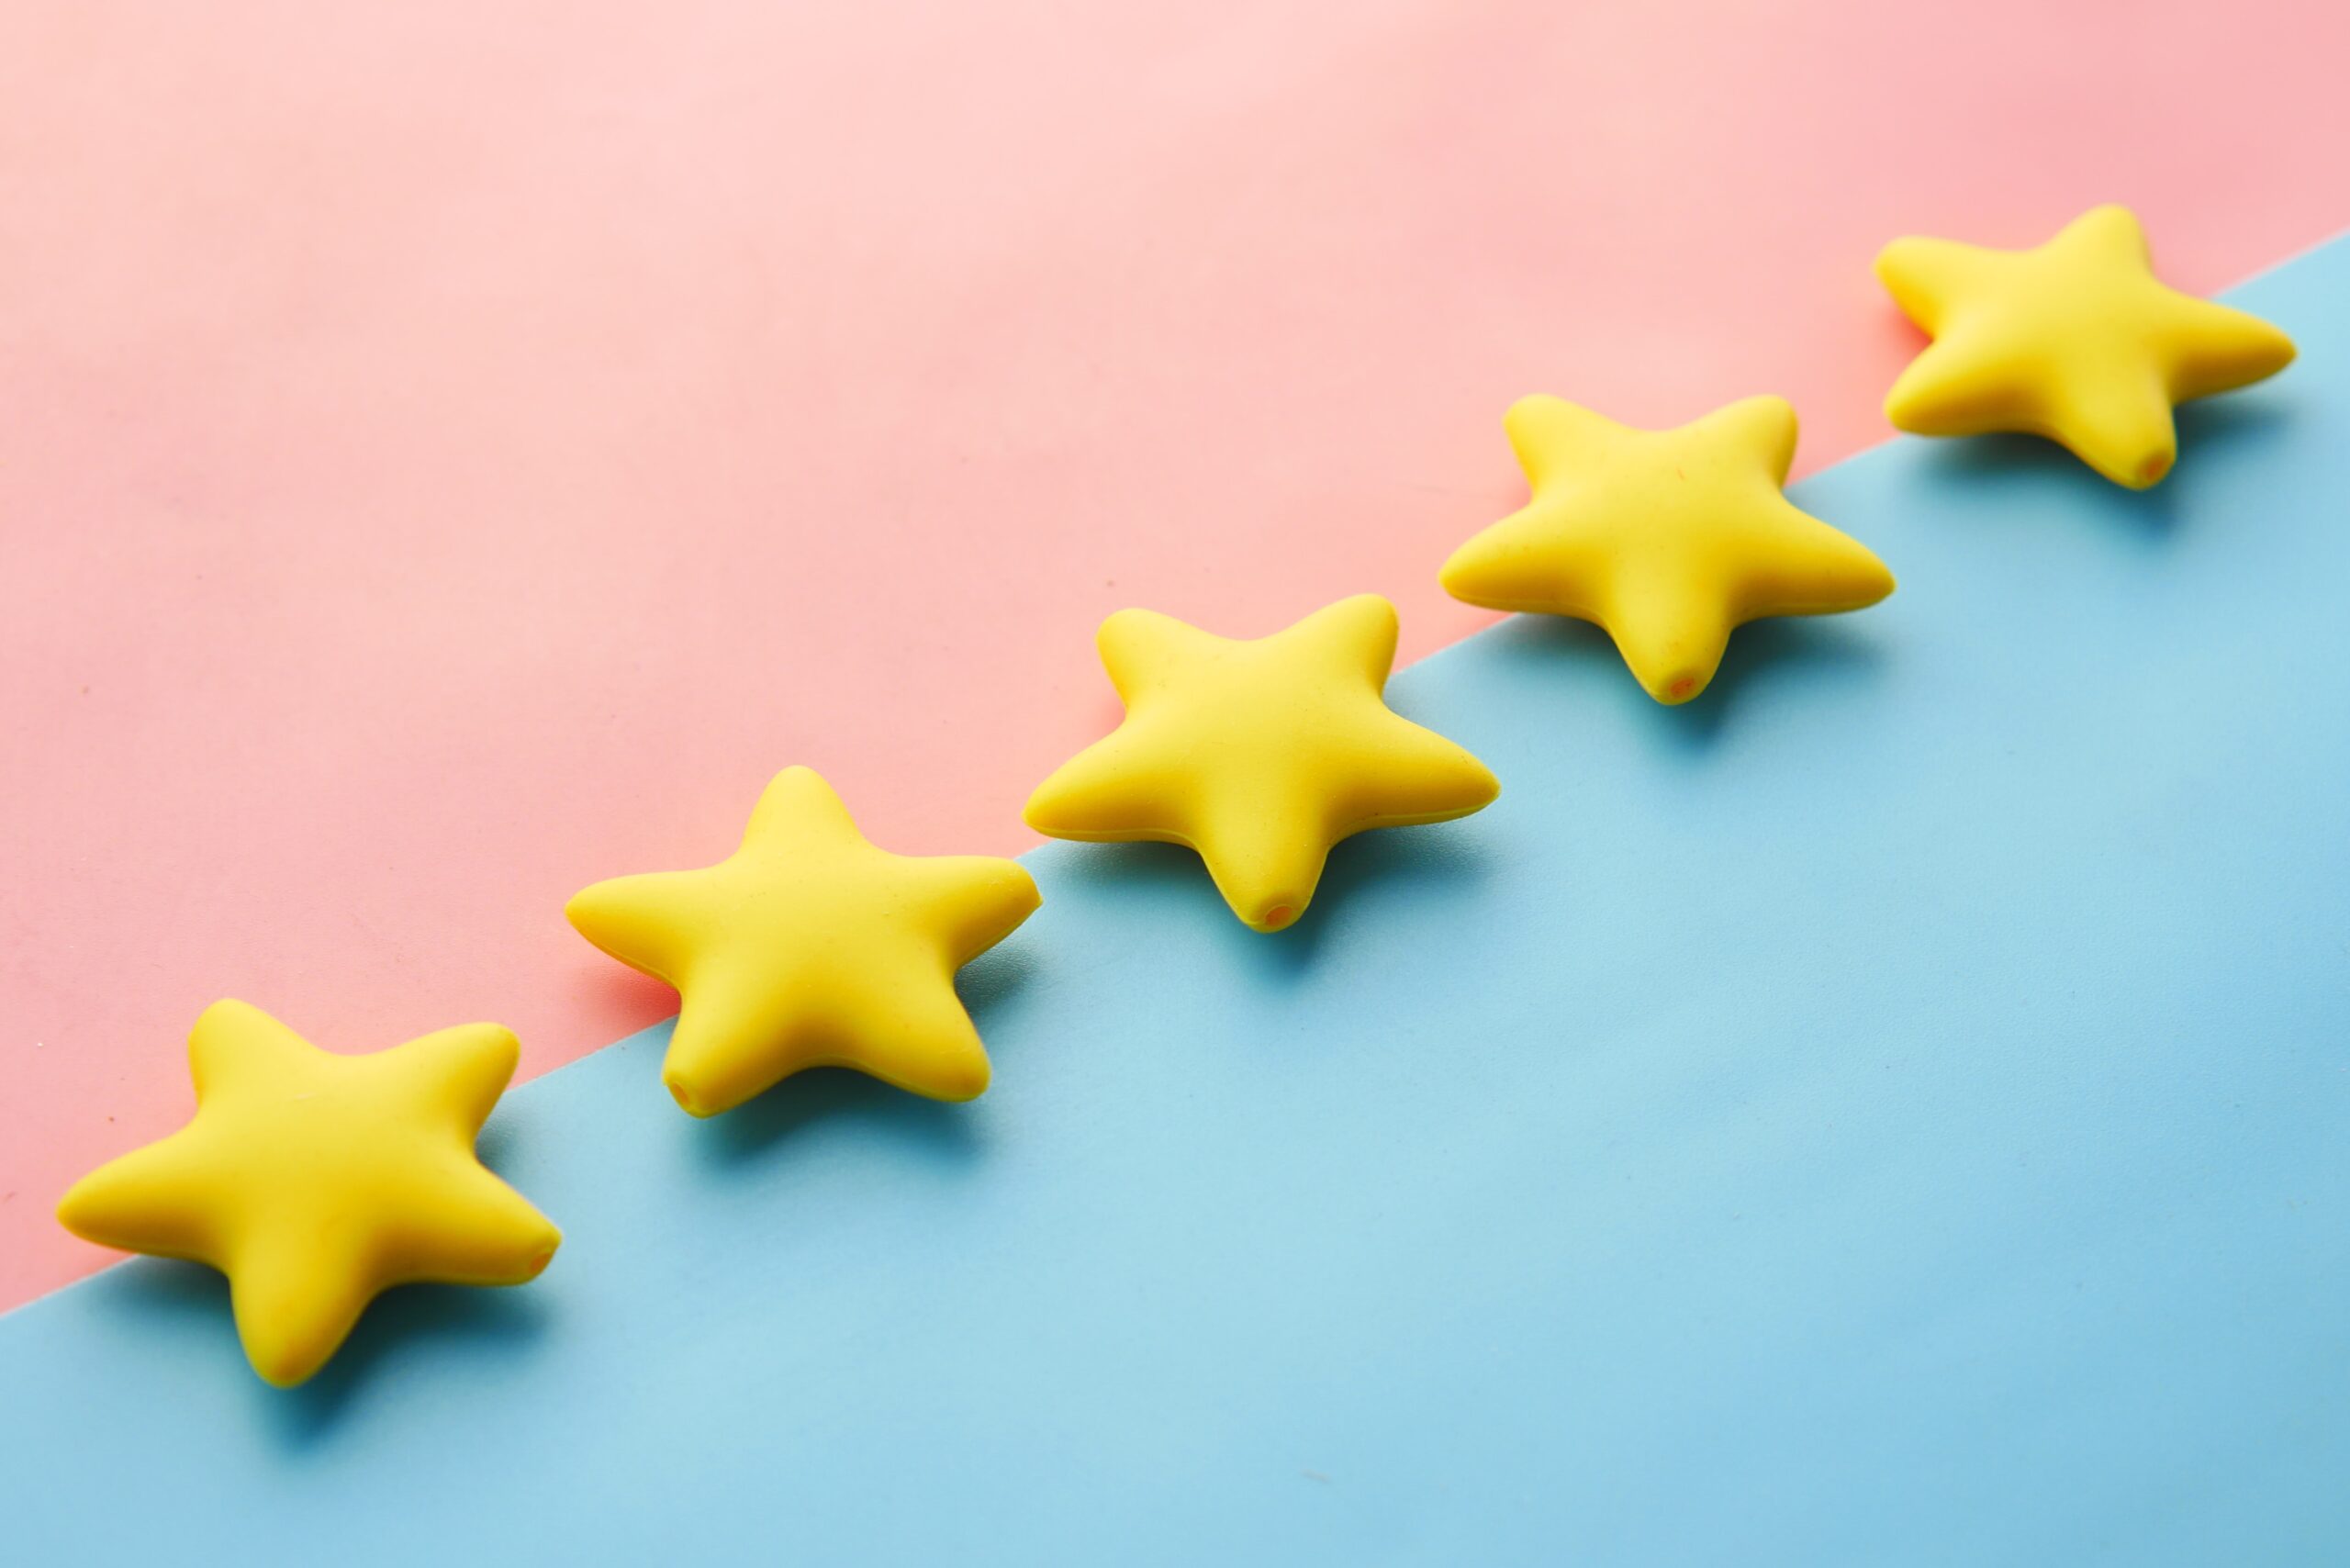 5 candy yellow gold stars against a pink and blue background